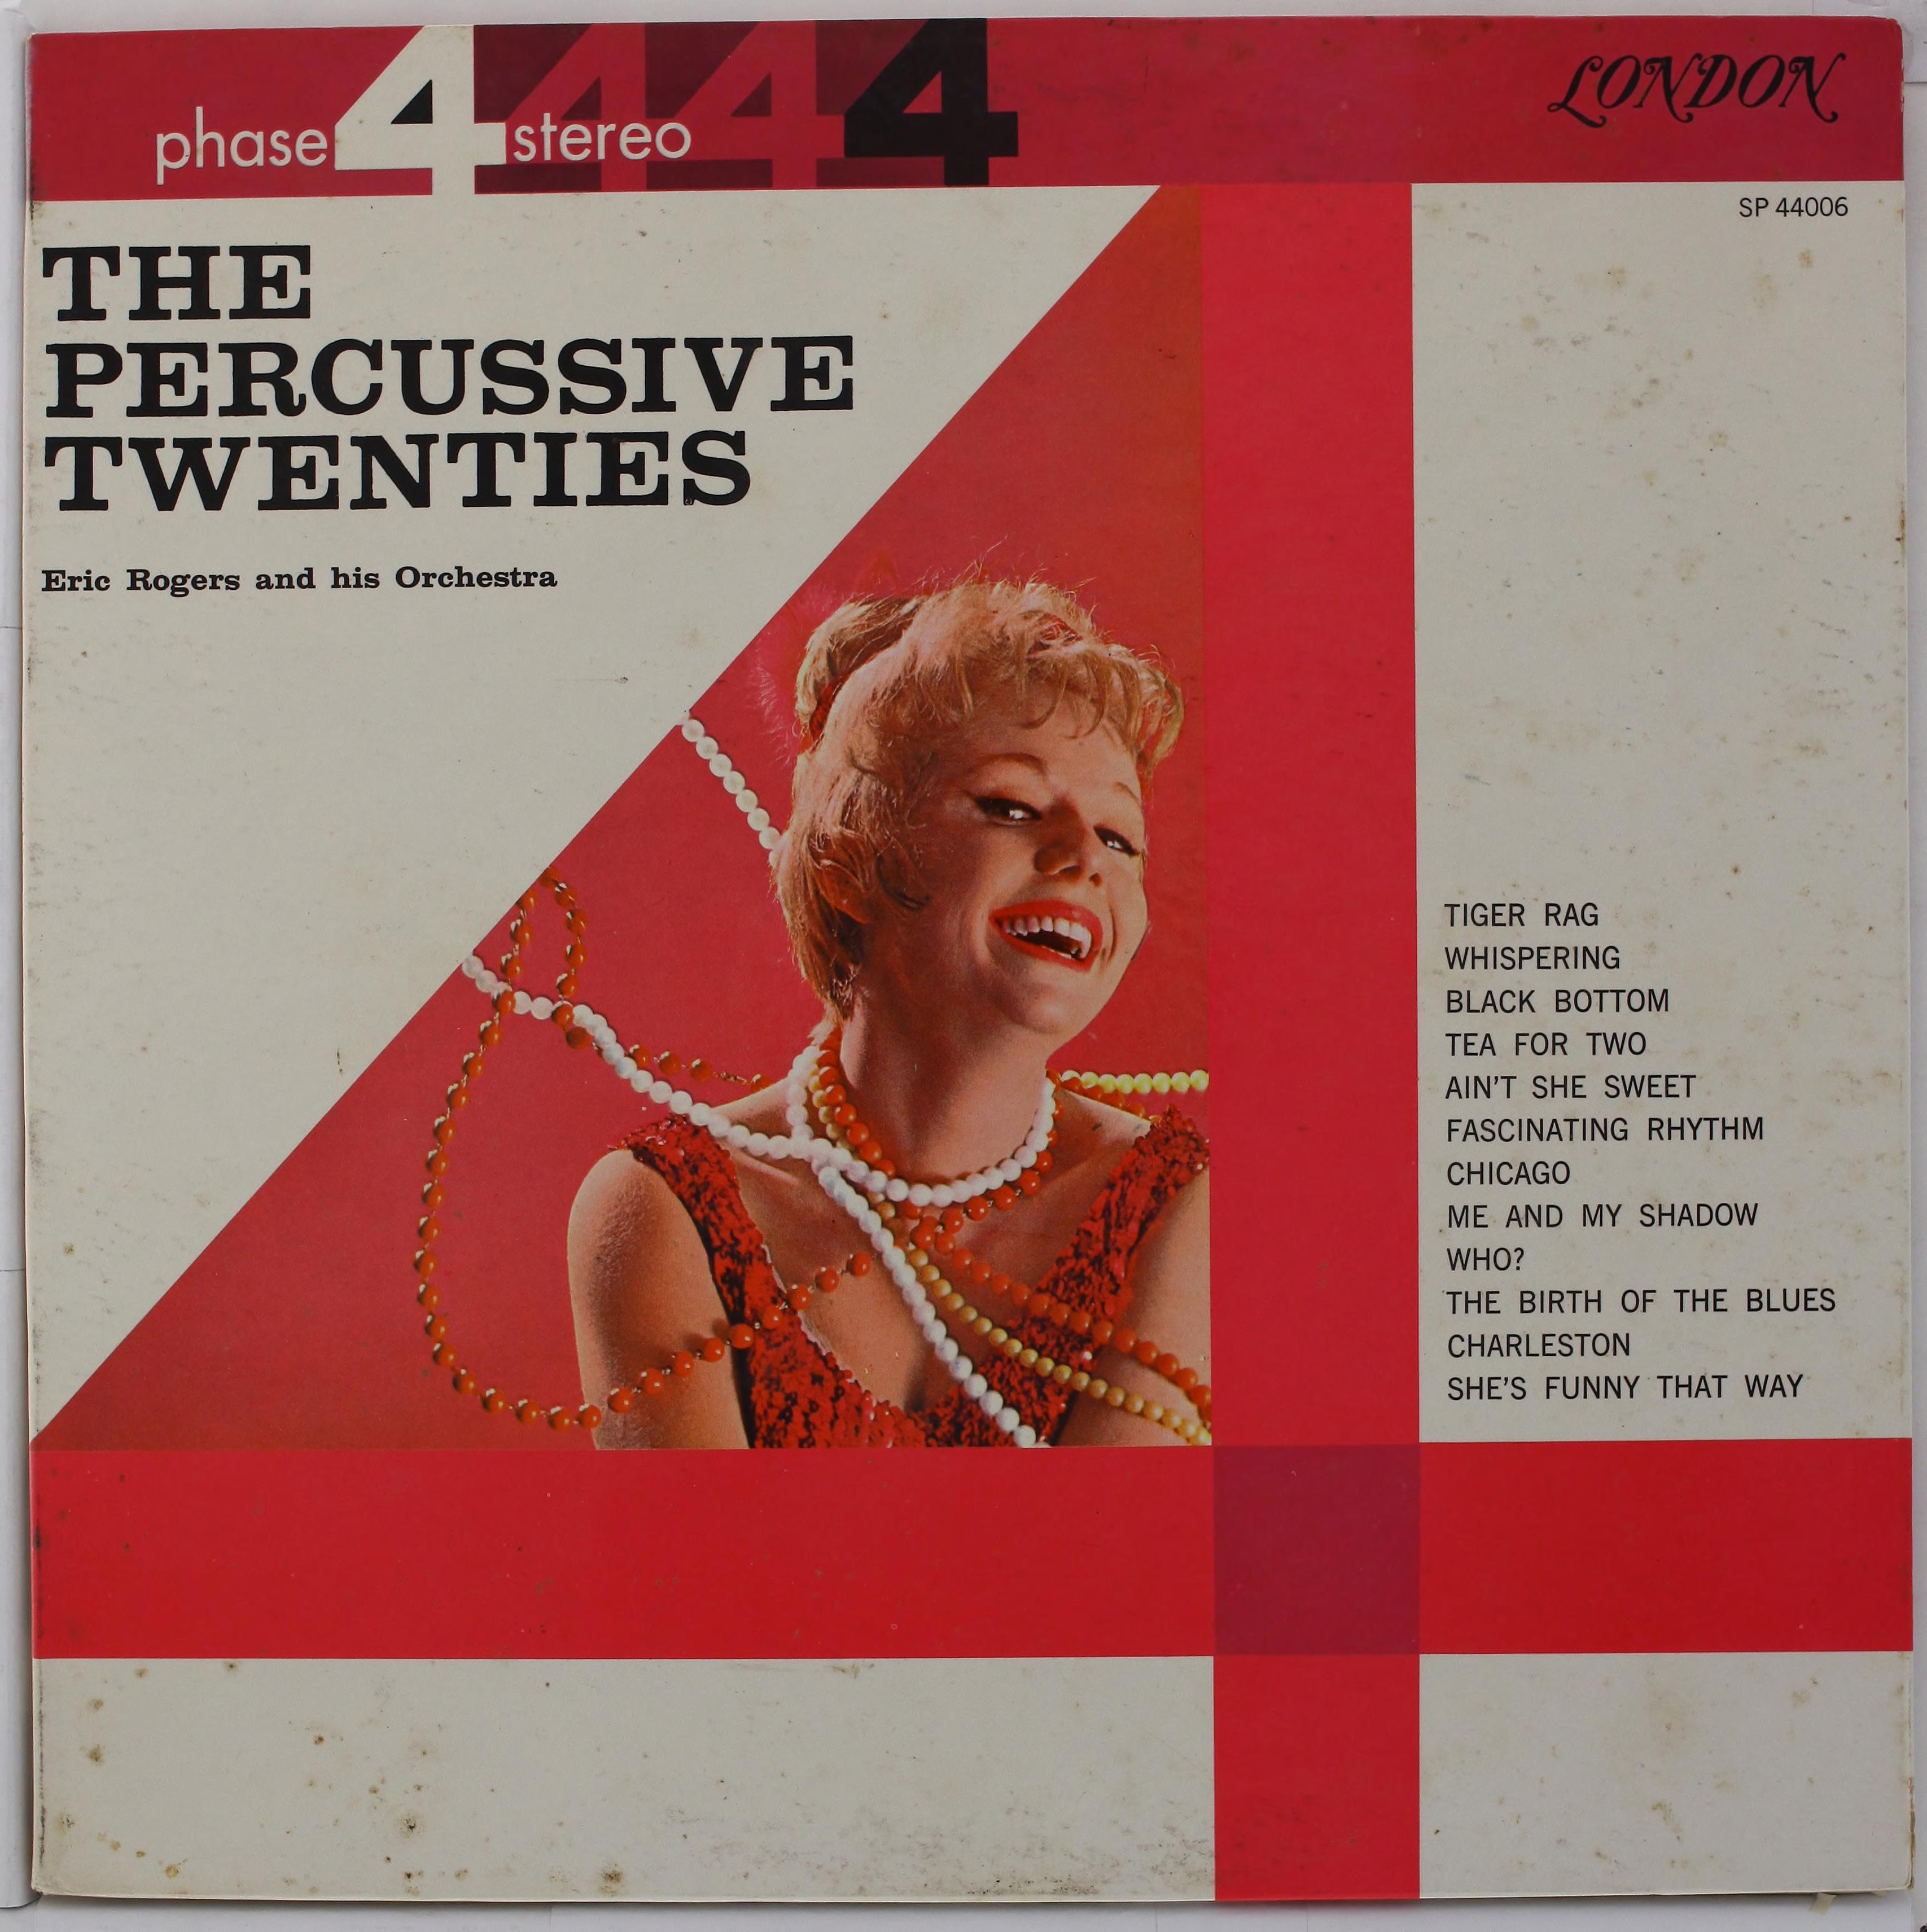 The percussive twenties : Rogers, Eric, conductor : Free Download 